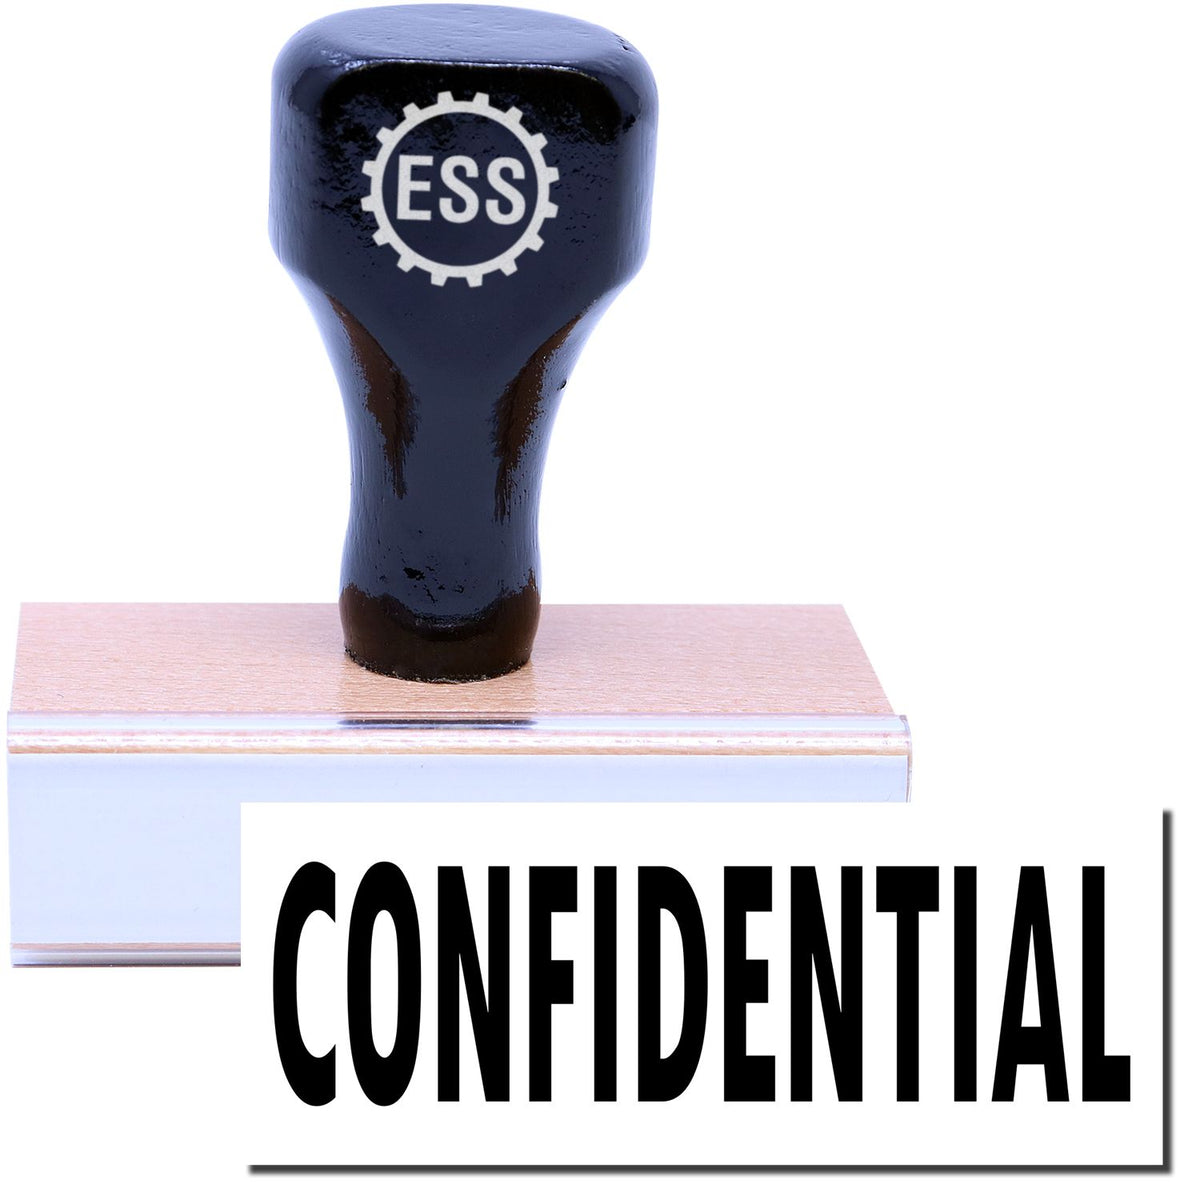 A stock office rubber stamp with a stamped image showing how the text &quot;CONFIDENTIAL&quot; is displayed after stamping.